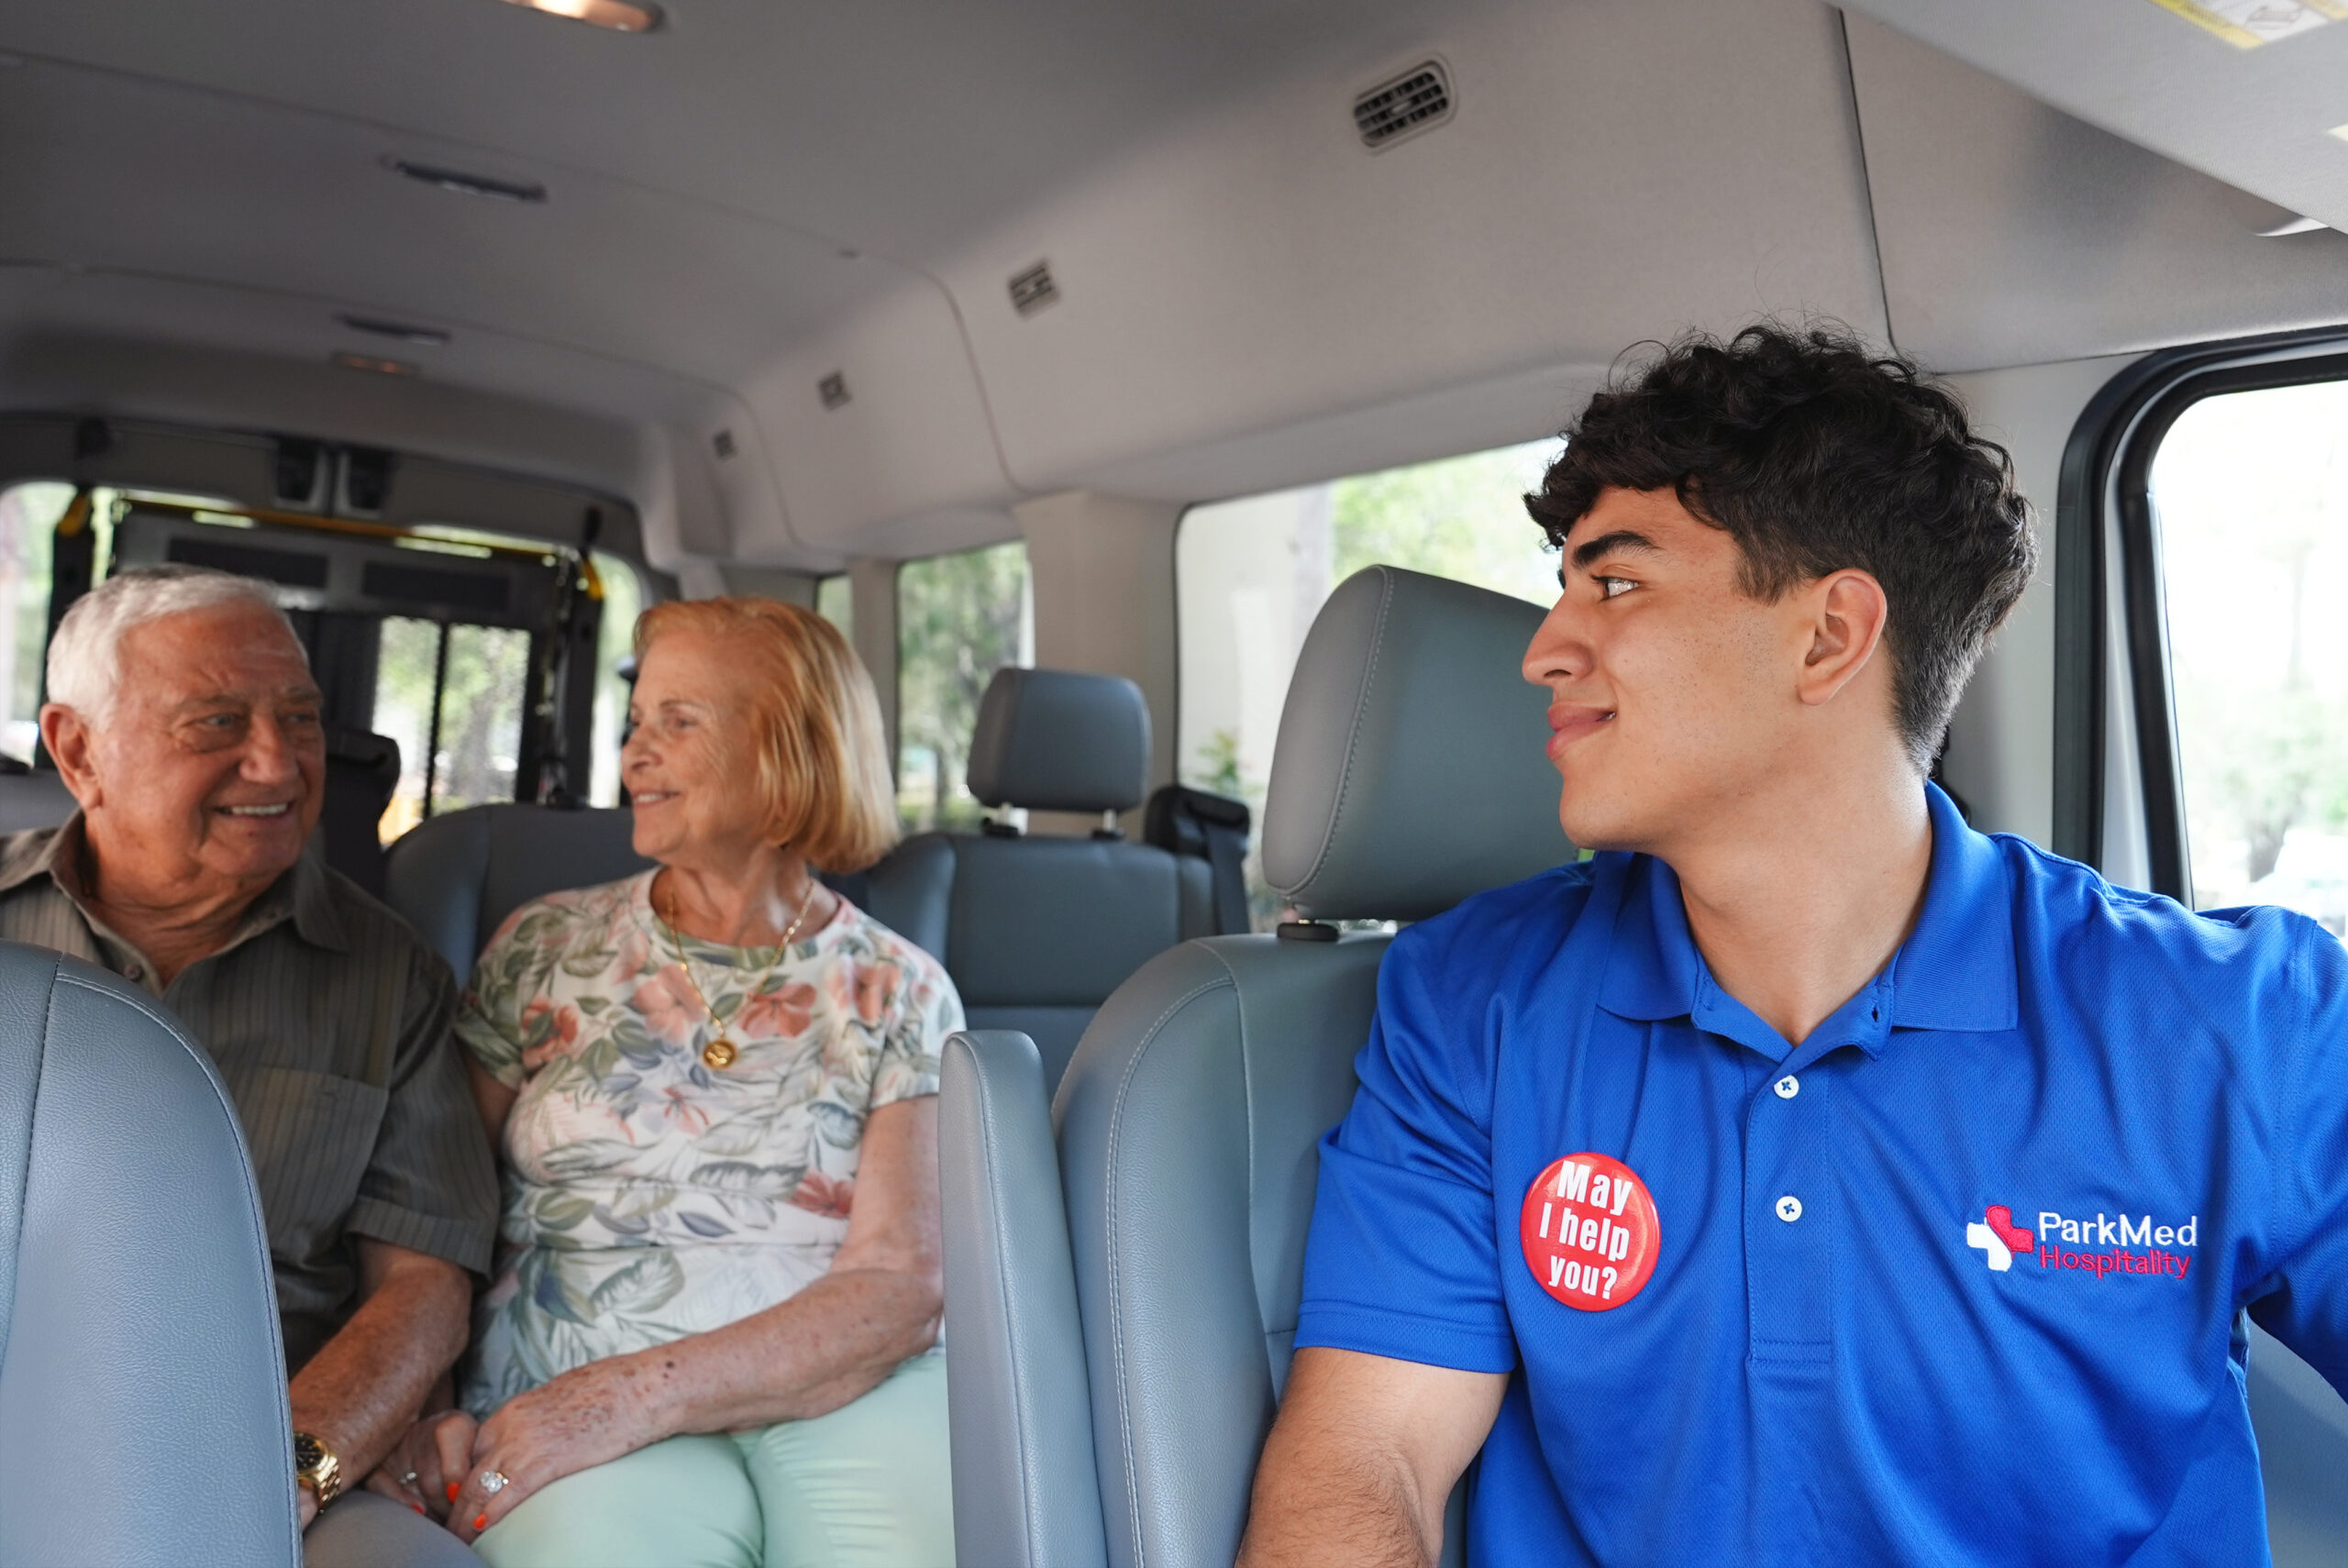 ParkMed Hospitality Employee Patient Shuttle Driver interacting with older male and female patients inside of a transit van